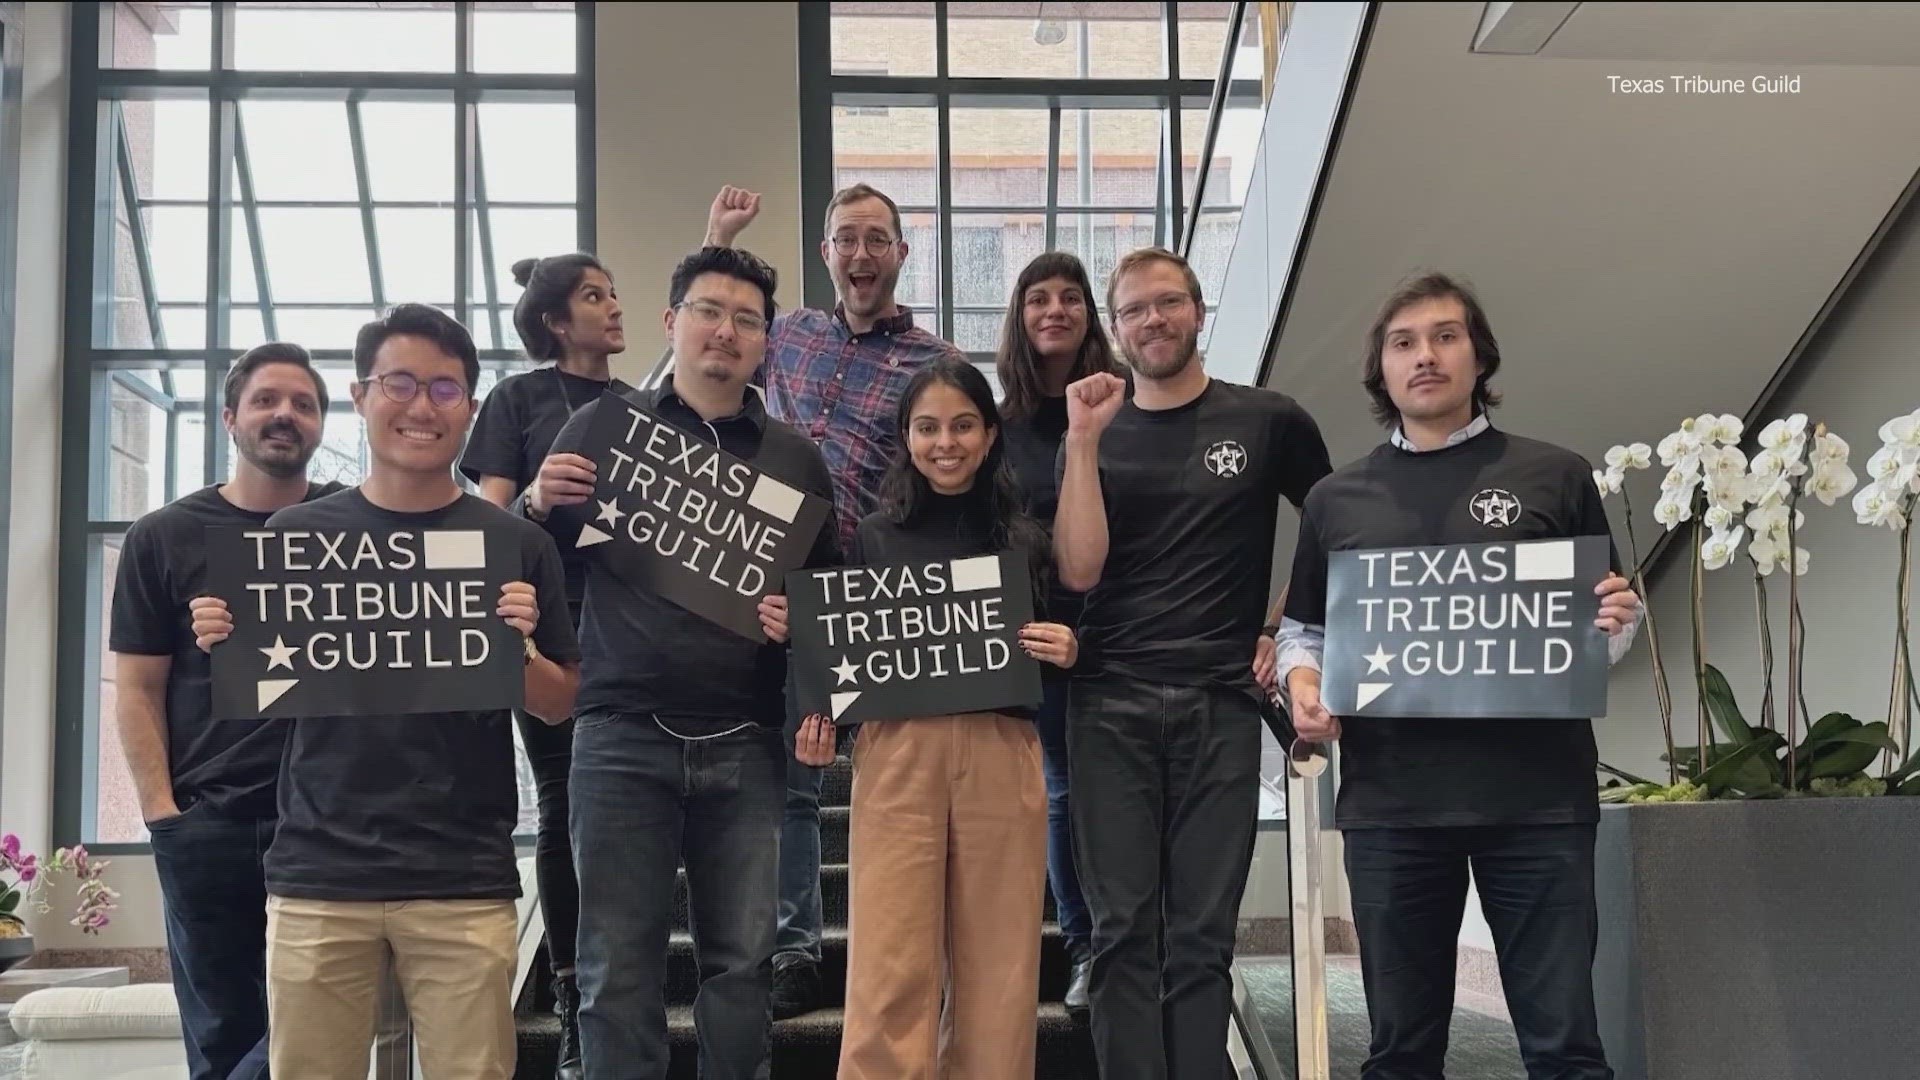 Dozens of workers at The Texas Tribune want to unionize. KVUE spoke with a reporter about what workers hope to accomplish as a union.